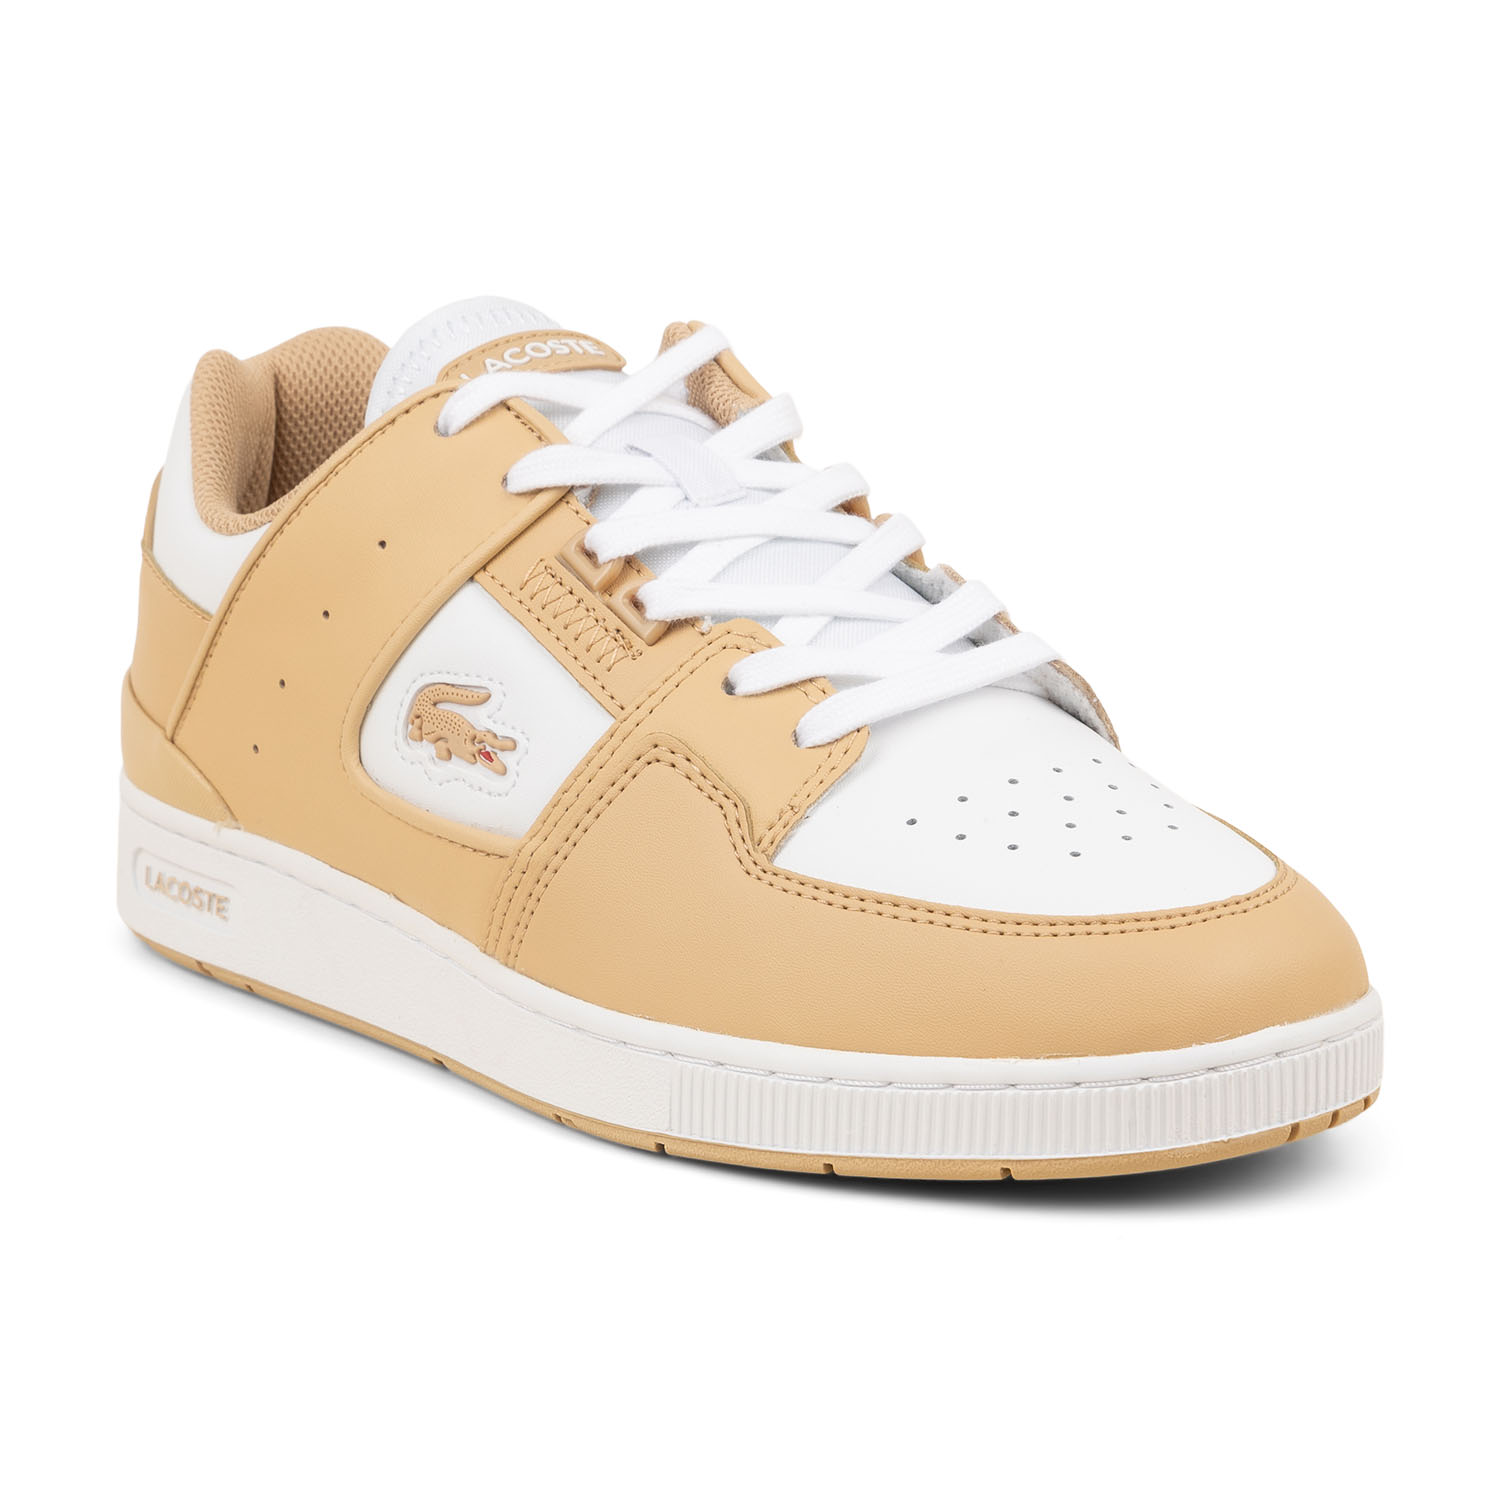 02 - COURT CAGE - LACOSTE -  - Cuir